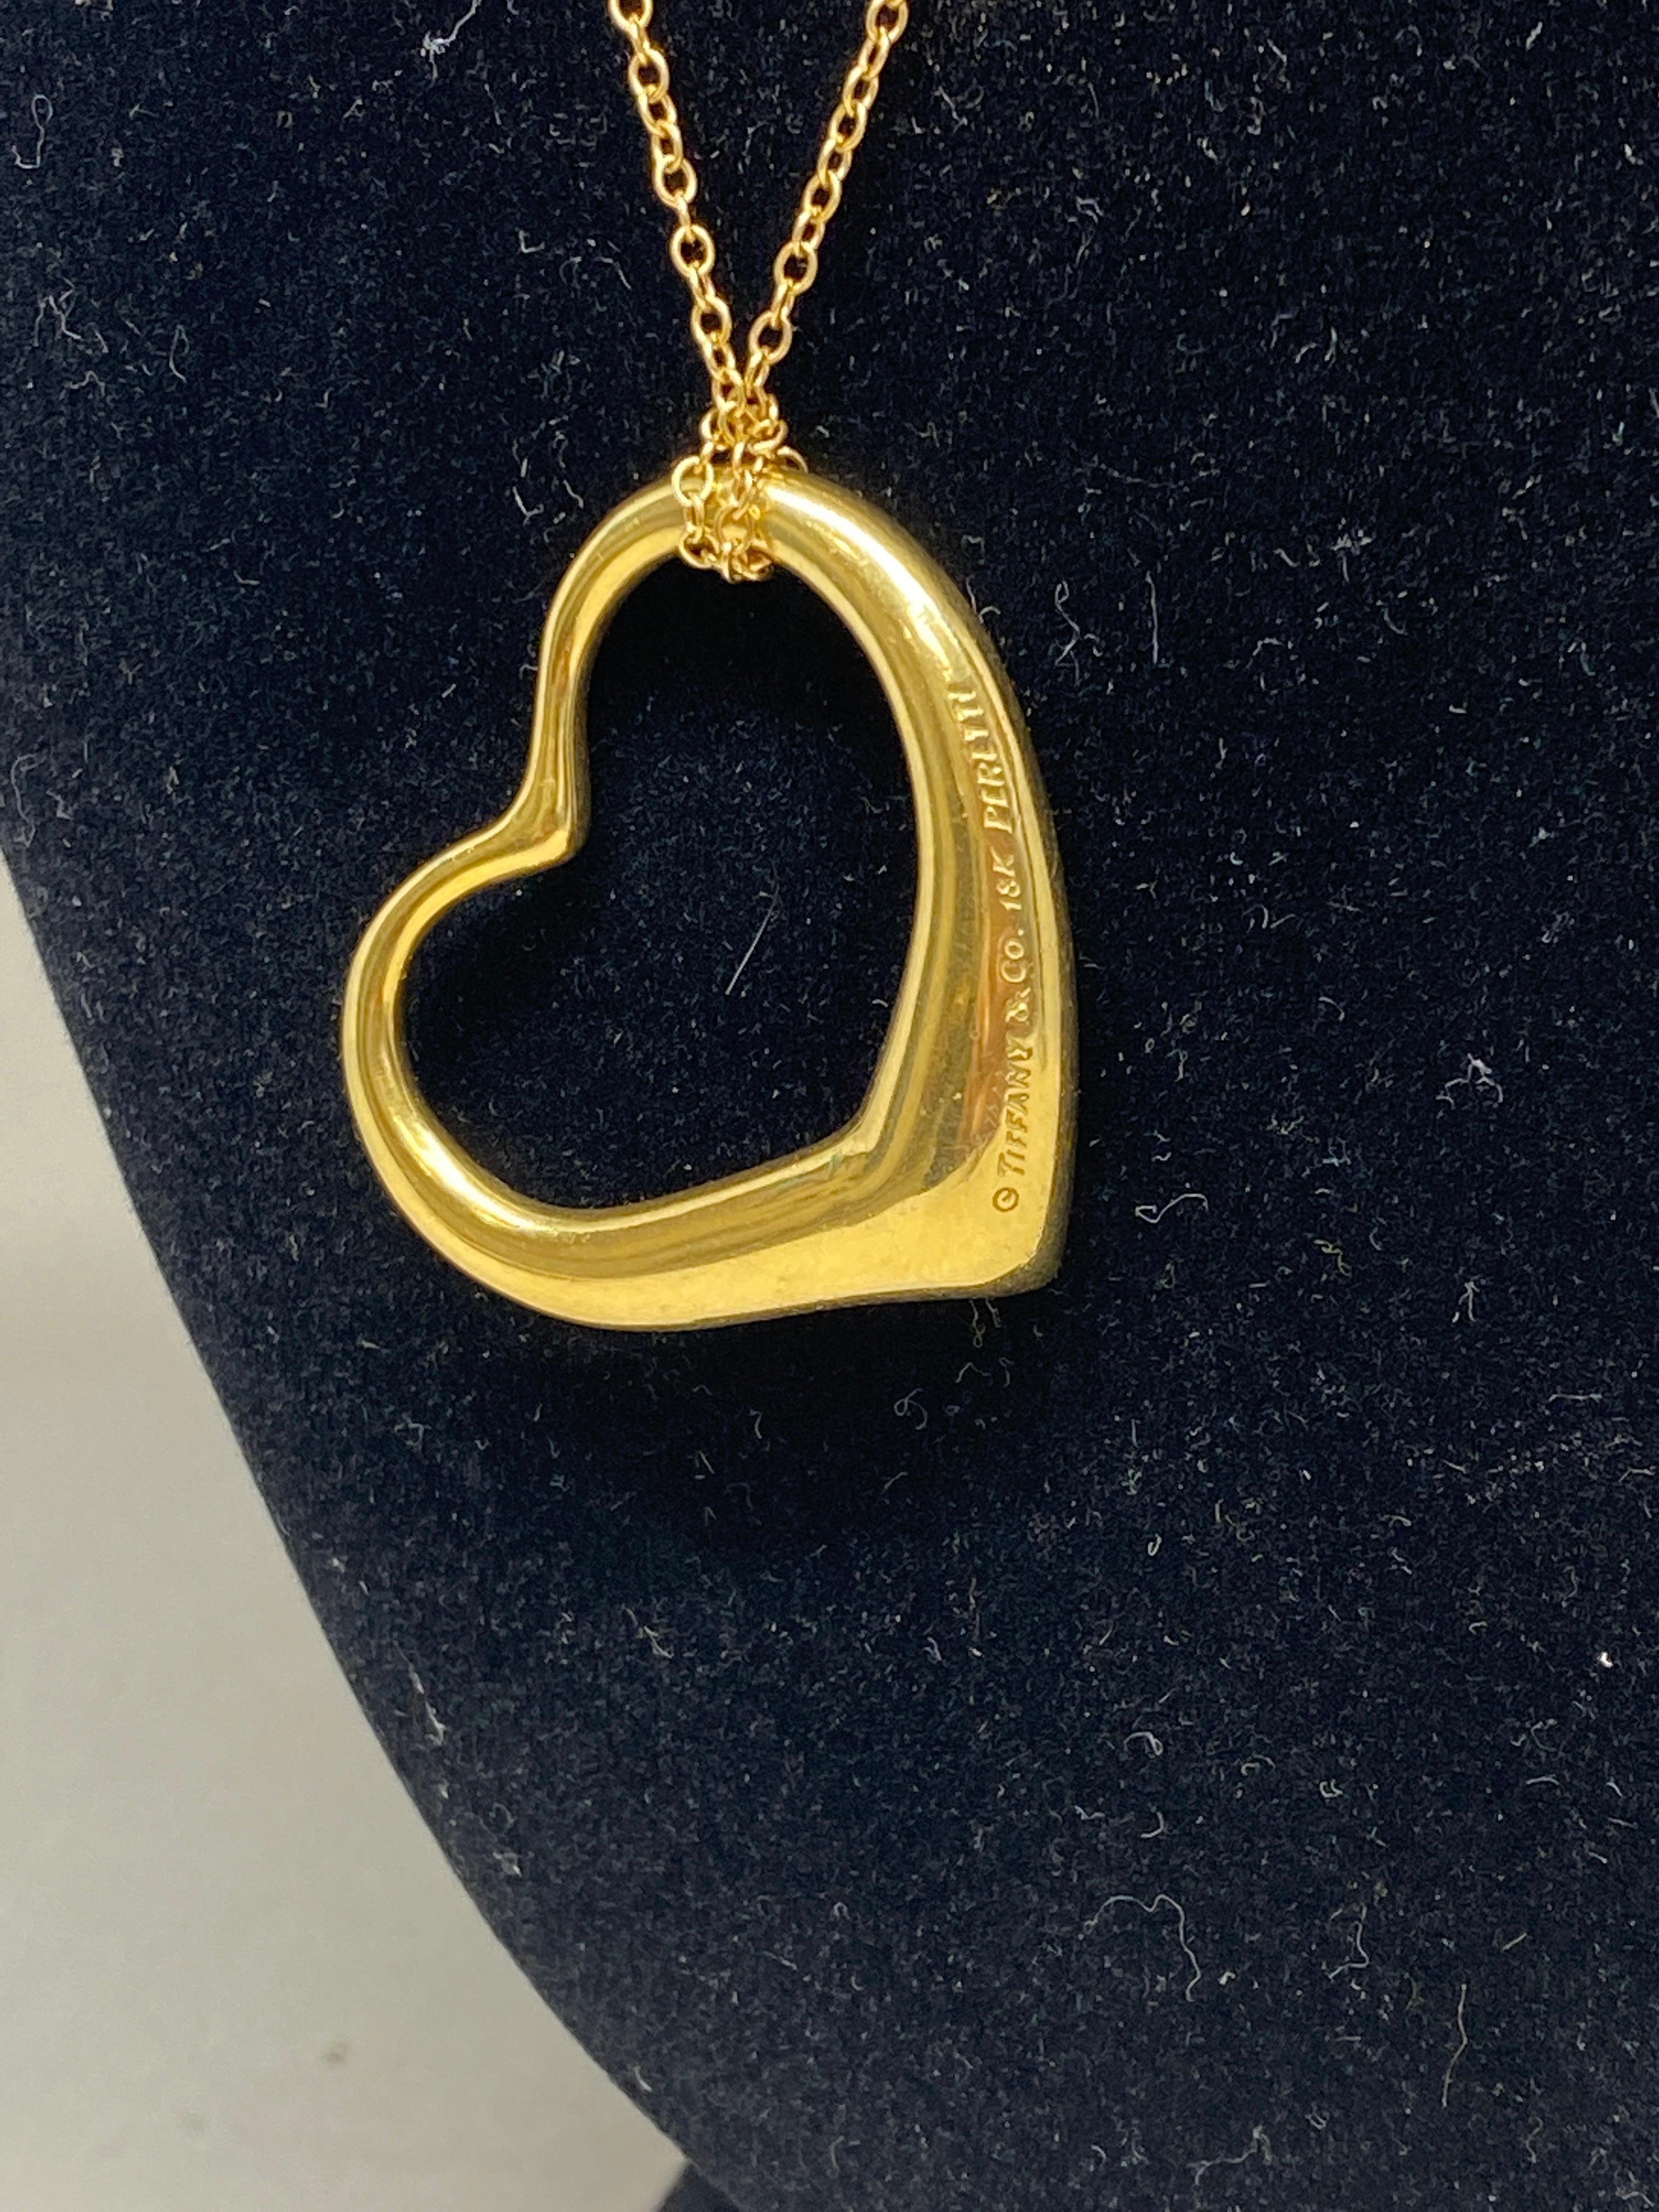 18k Yellow Gold Tiffany & Co EXTRA Large Elsa Peretti Open Hear Necklace Pendant For Sale 3